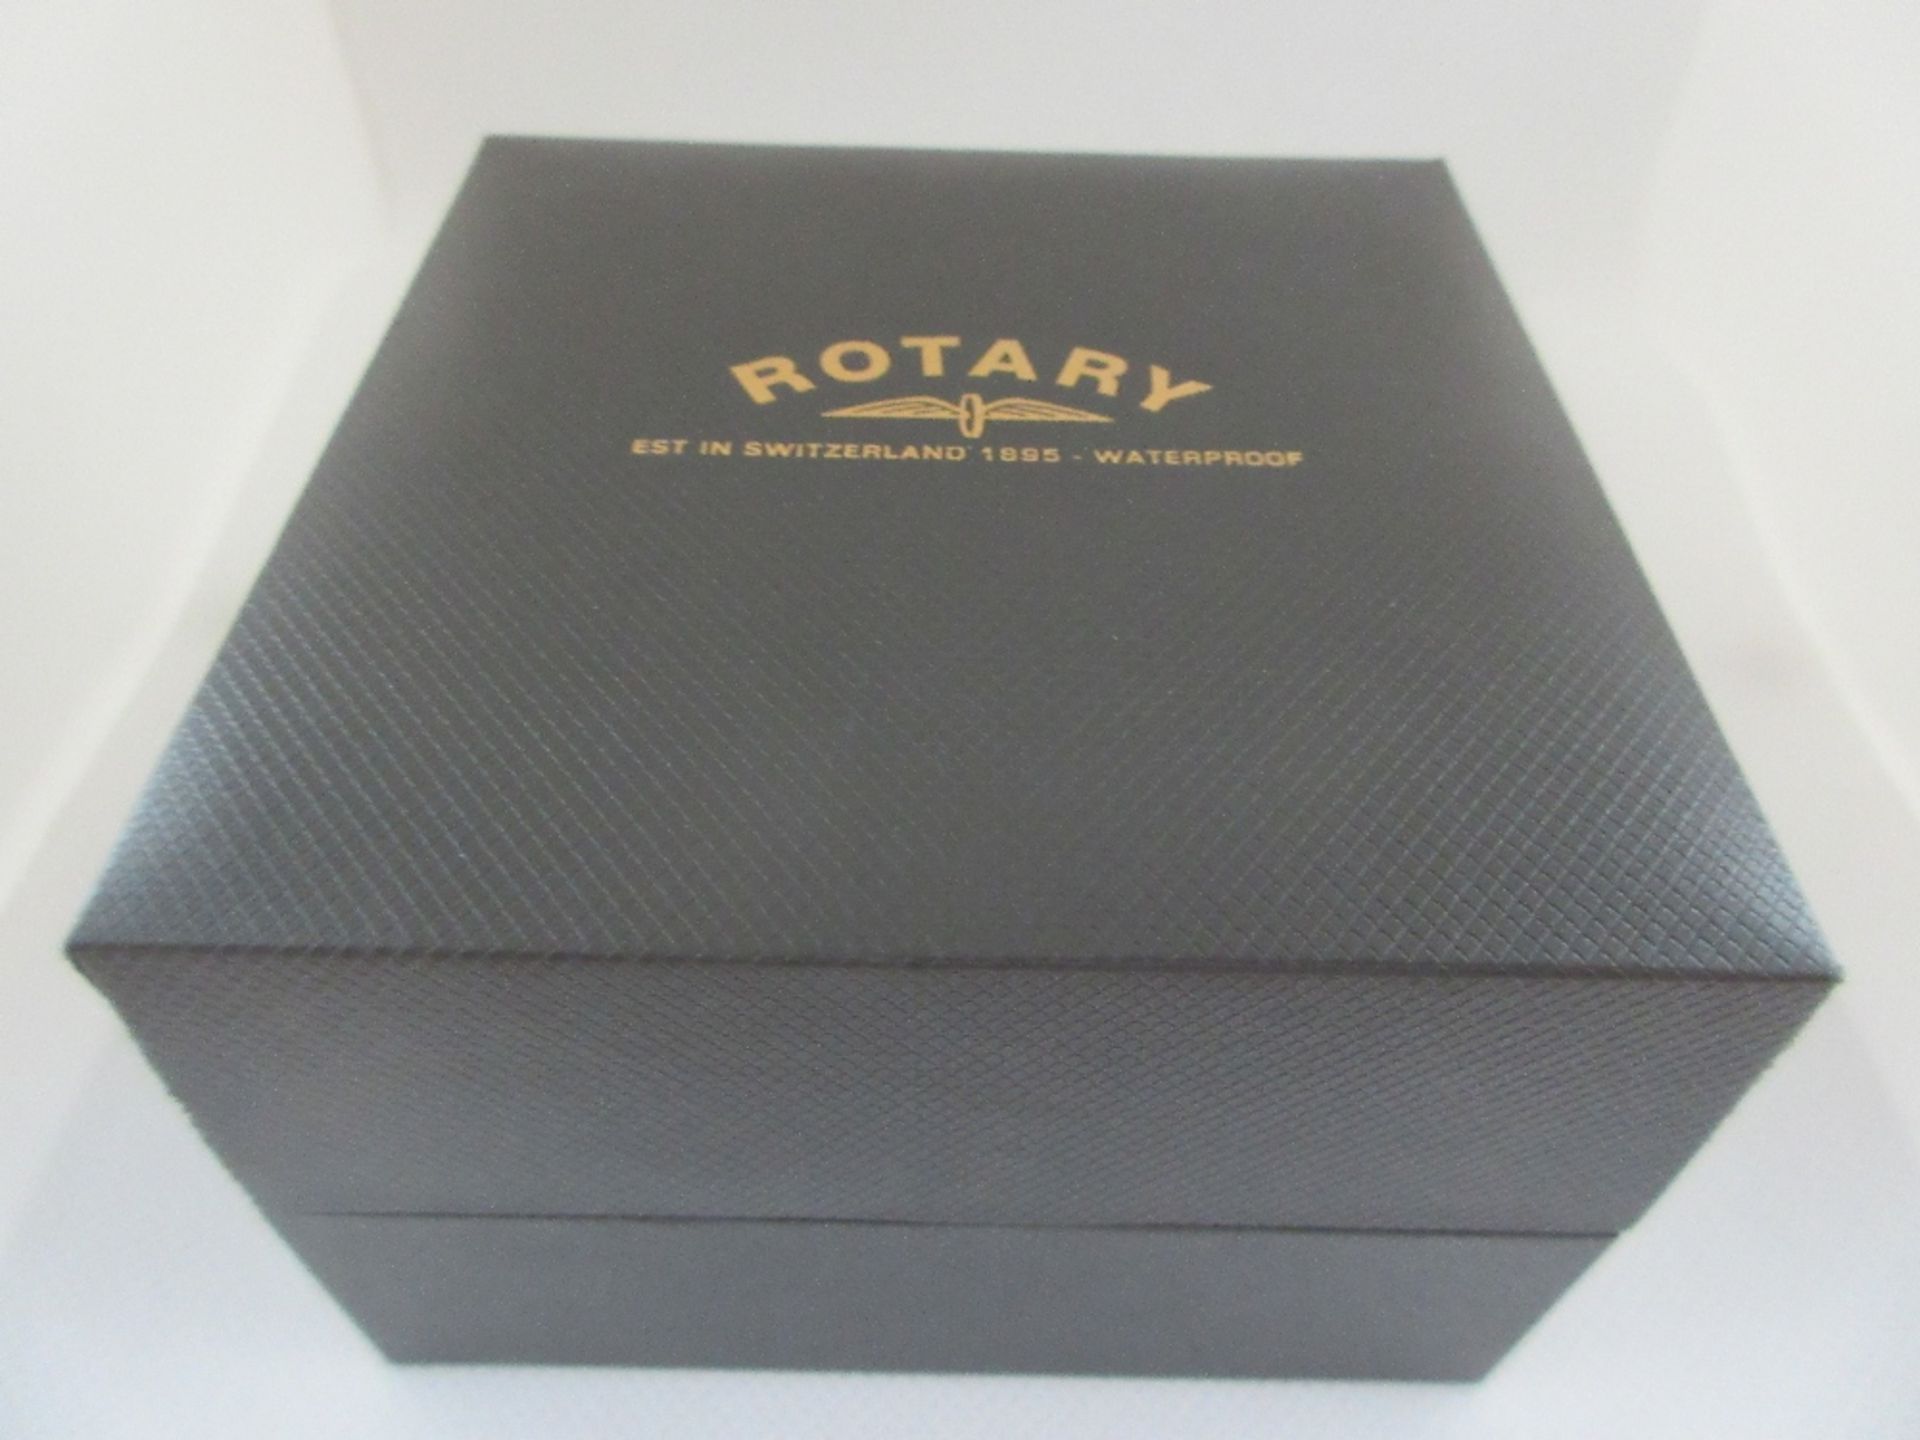 ROTARY MALE WATCH, MODEL GB00497/03, CASE DIAMETER 32MM, STAINLESS STEEL STRAP, BOXED, RRP £ 159 - Image 4 of 4